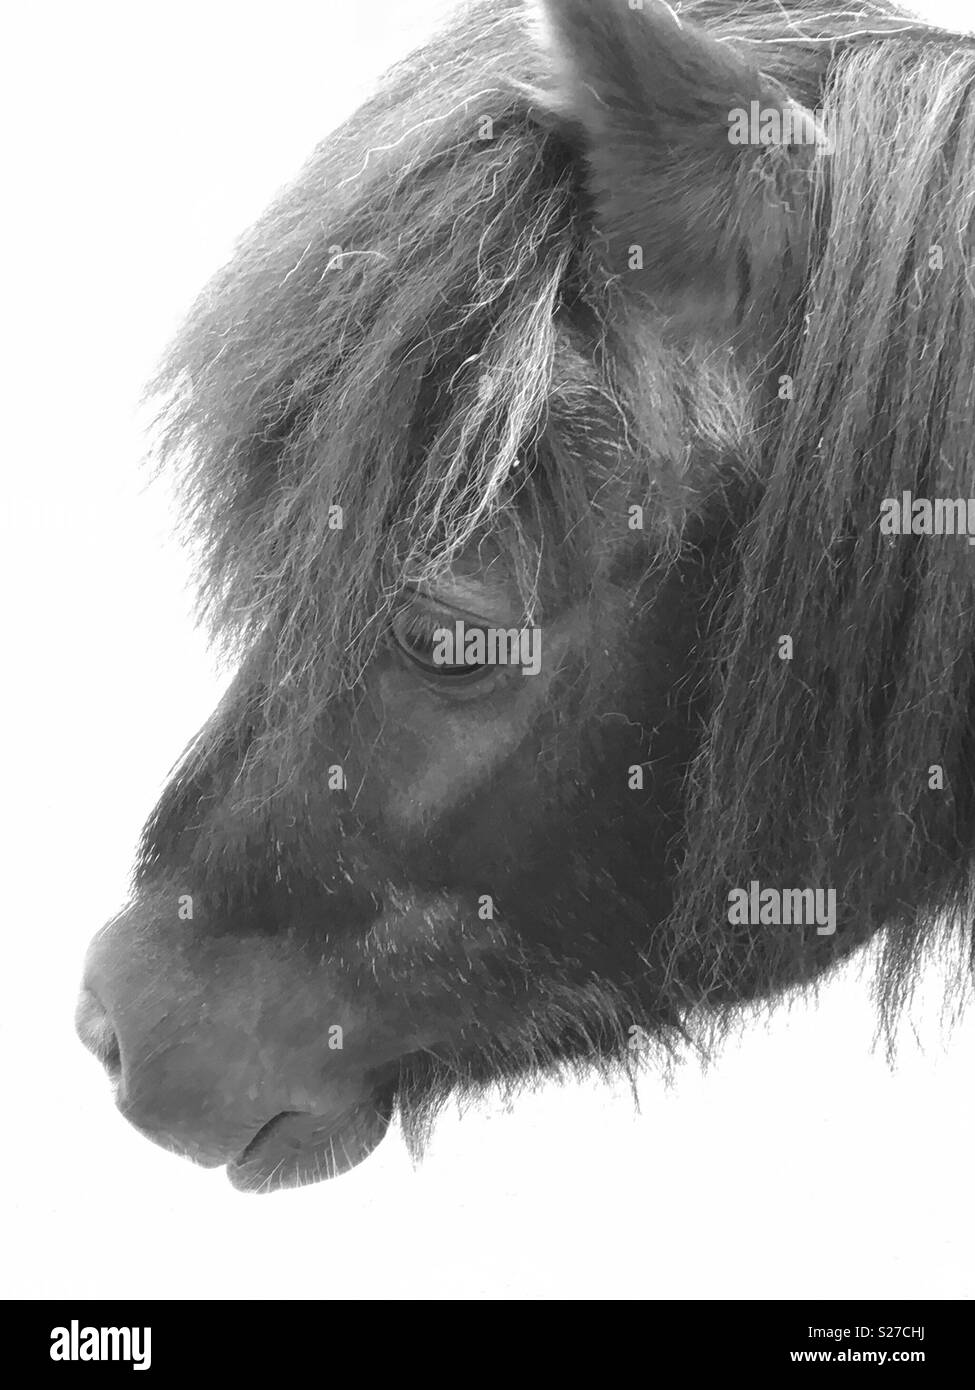 Shetland pony in Black and White with head in profile. Stock Photo